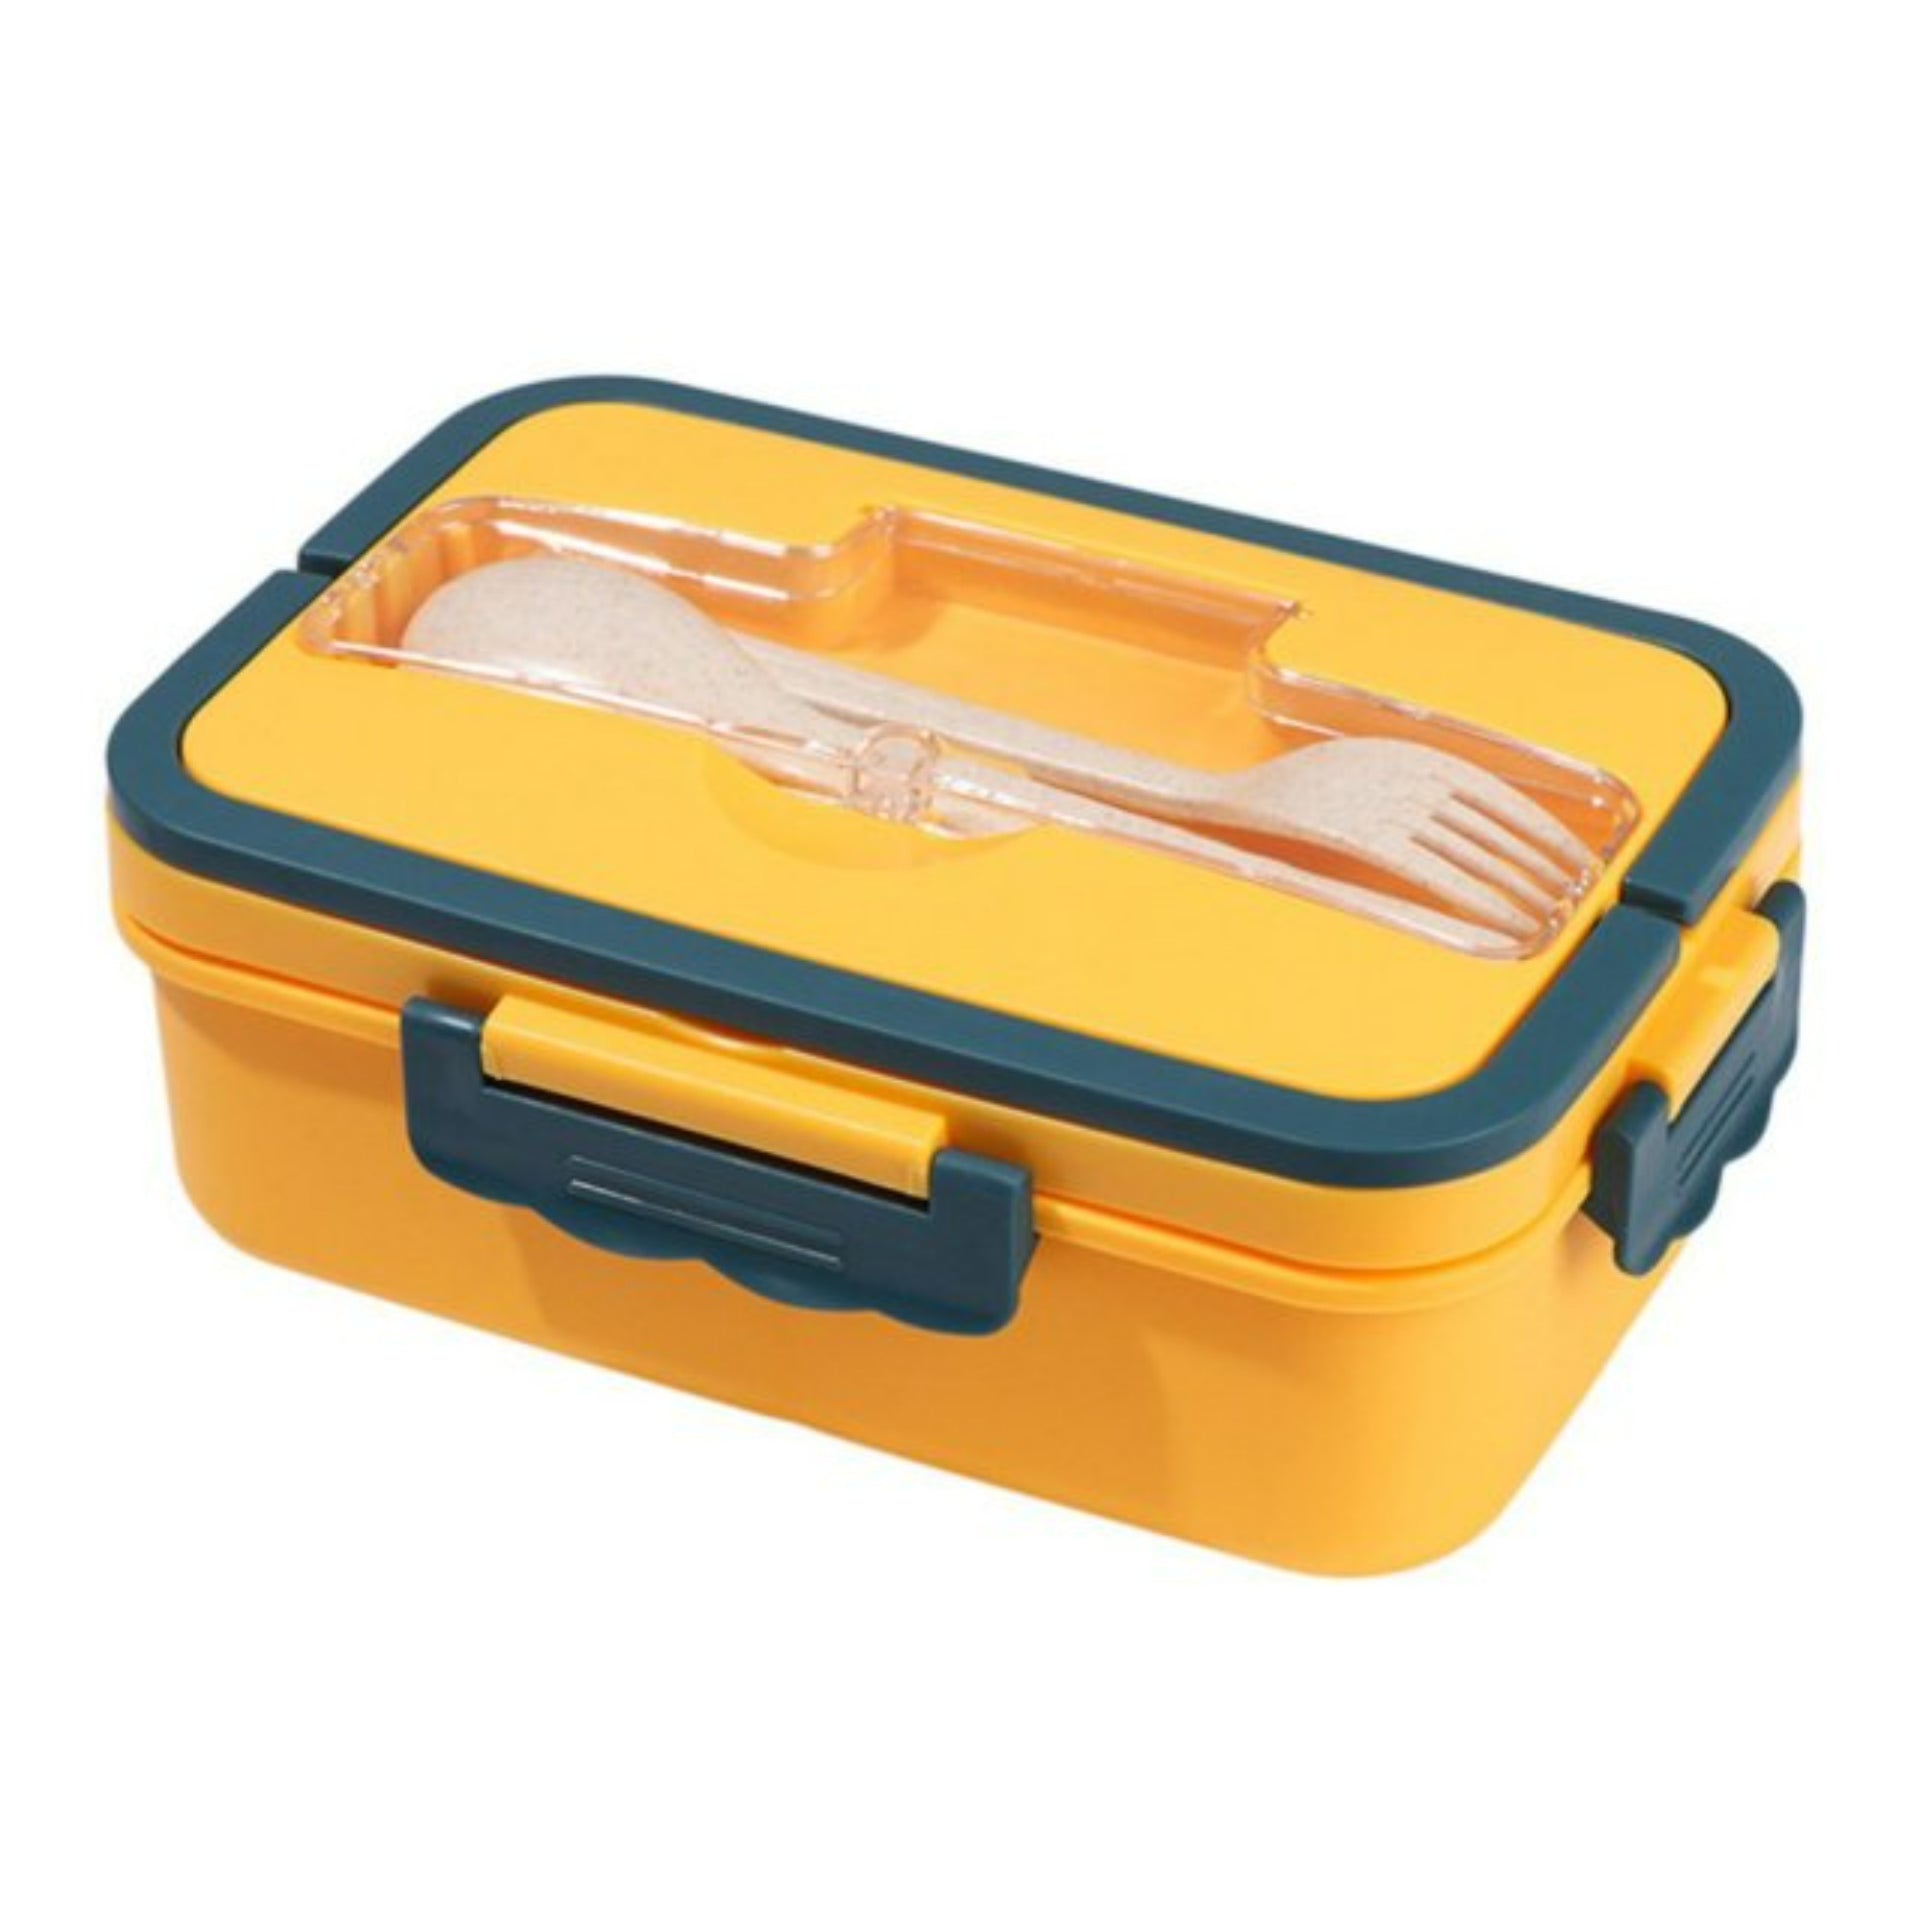 https://allabundantthings.com/cdn/shop/products/Wheat-Straw-With-A-Fork-And-Spoon-Student-Compartment-Lunch-Box-Can-Microwave-Lunch-Fresh-keeping.jpg_640x640_0ede3eee-23b1-4d48-9dfe-27a890c1f4ae.jpg?v=1646433848&width=1920